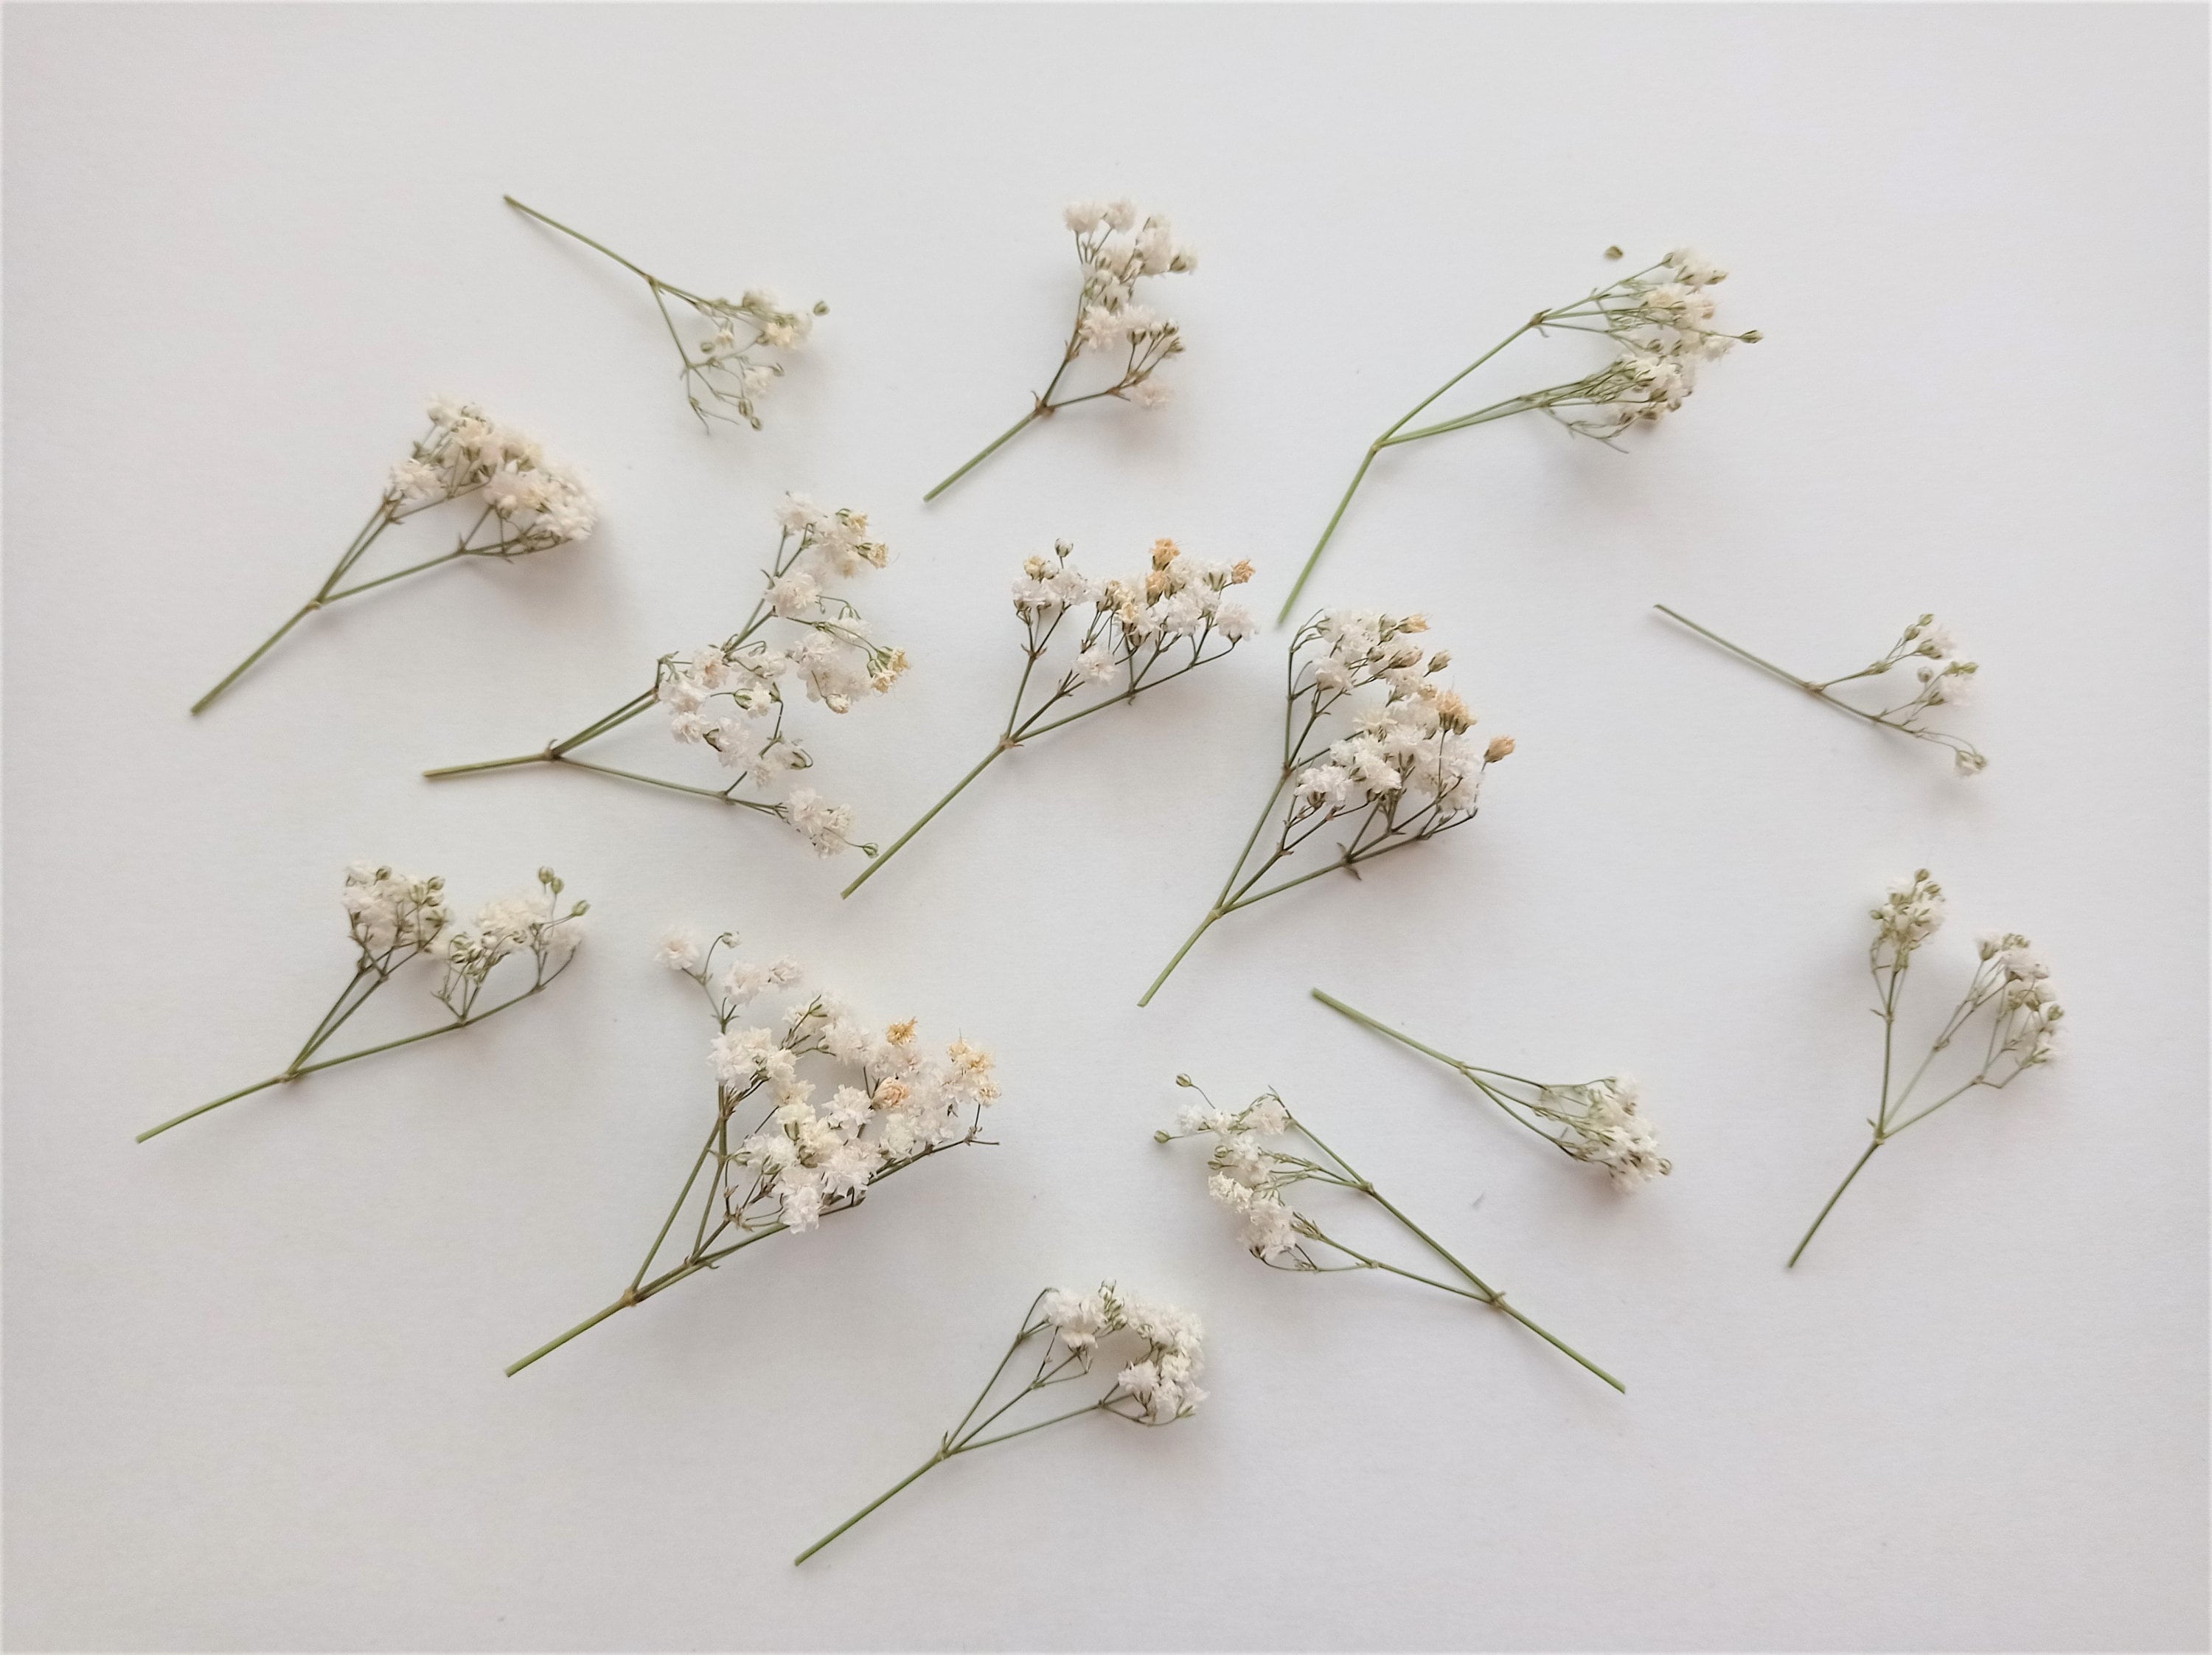  100 PCS White Pressed Dried Baby's Breath Flowers Bulk - 100%  Natural 5'' Flat Real Dry Mini Gypsophila Flower Branches for Wedding, Hair  Accessory, DIY Floral Resin Art, Home Party Decor 